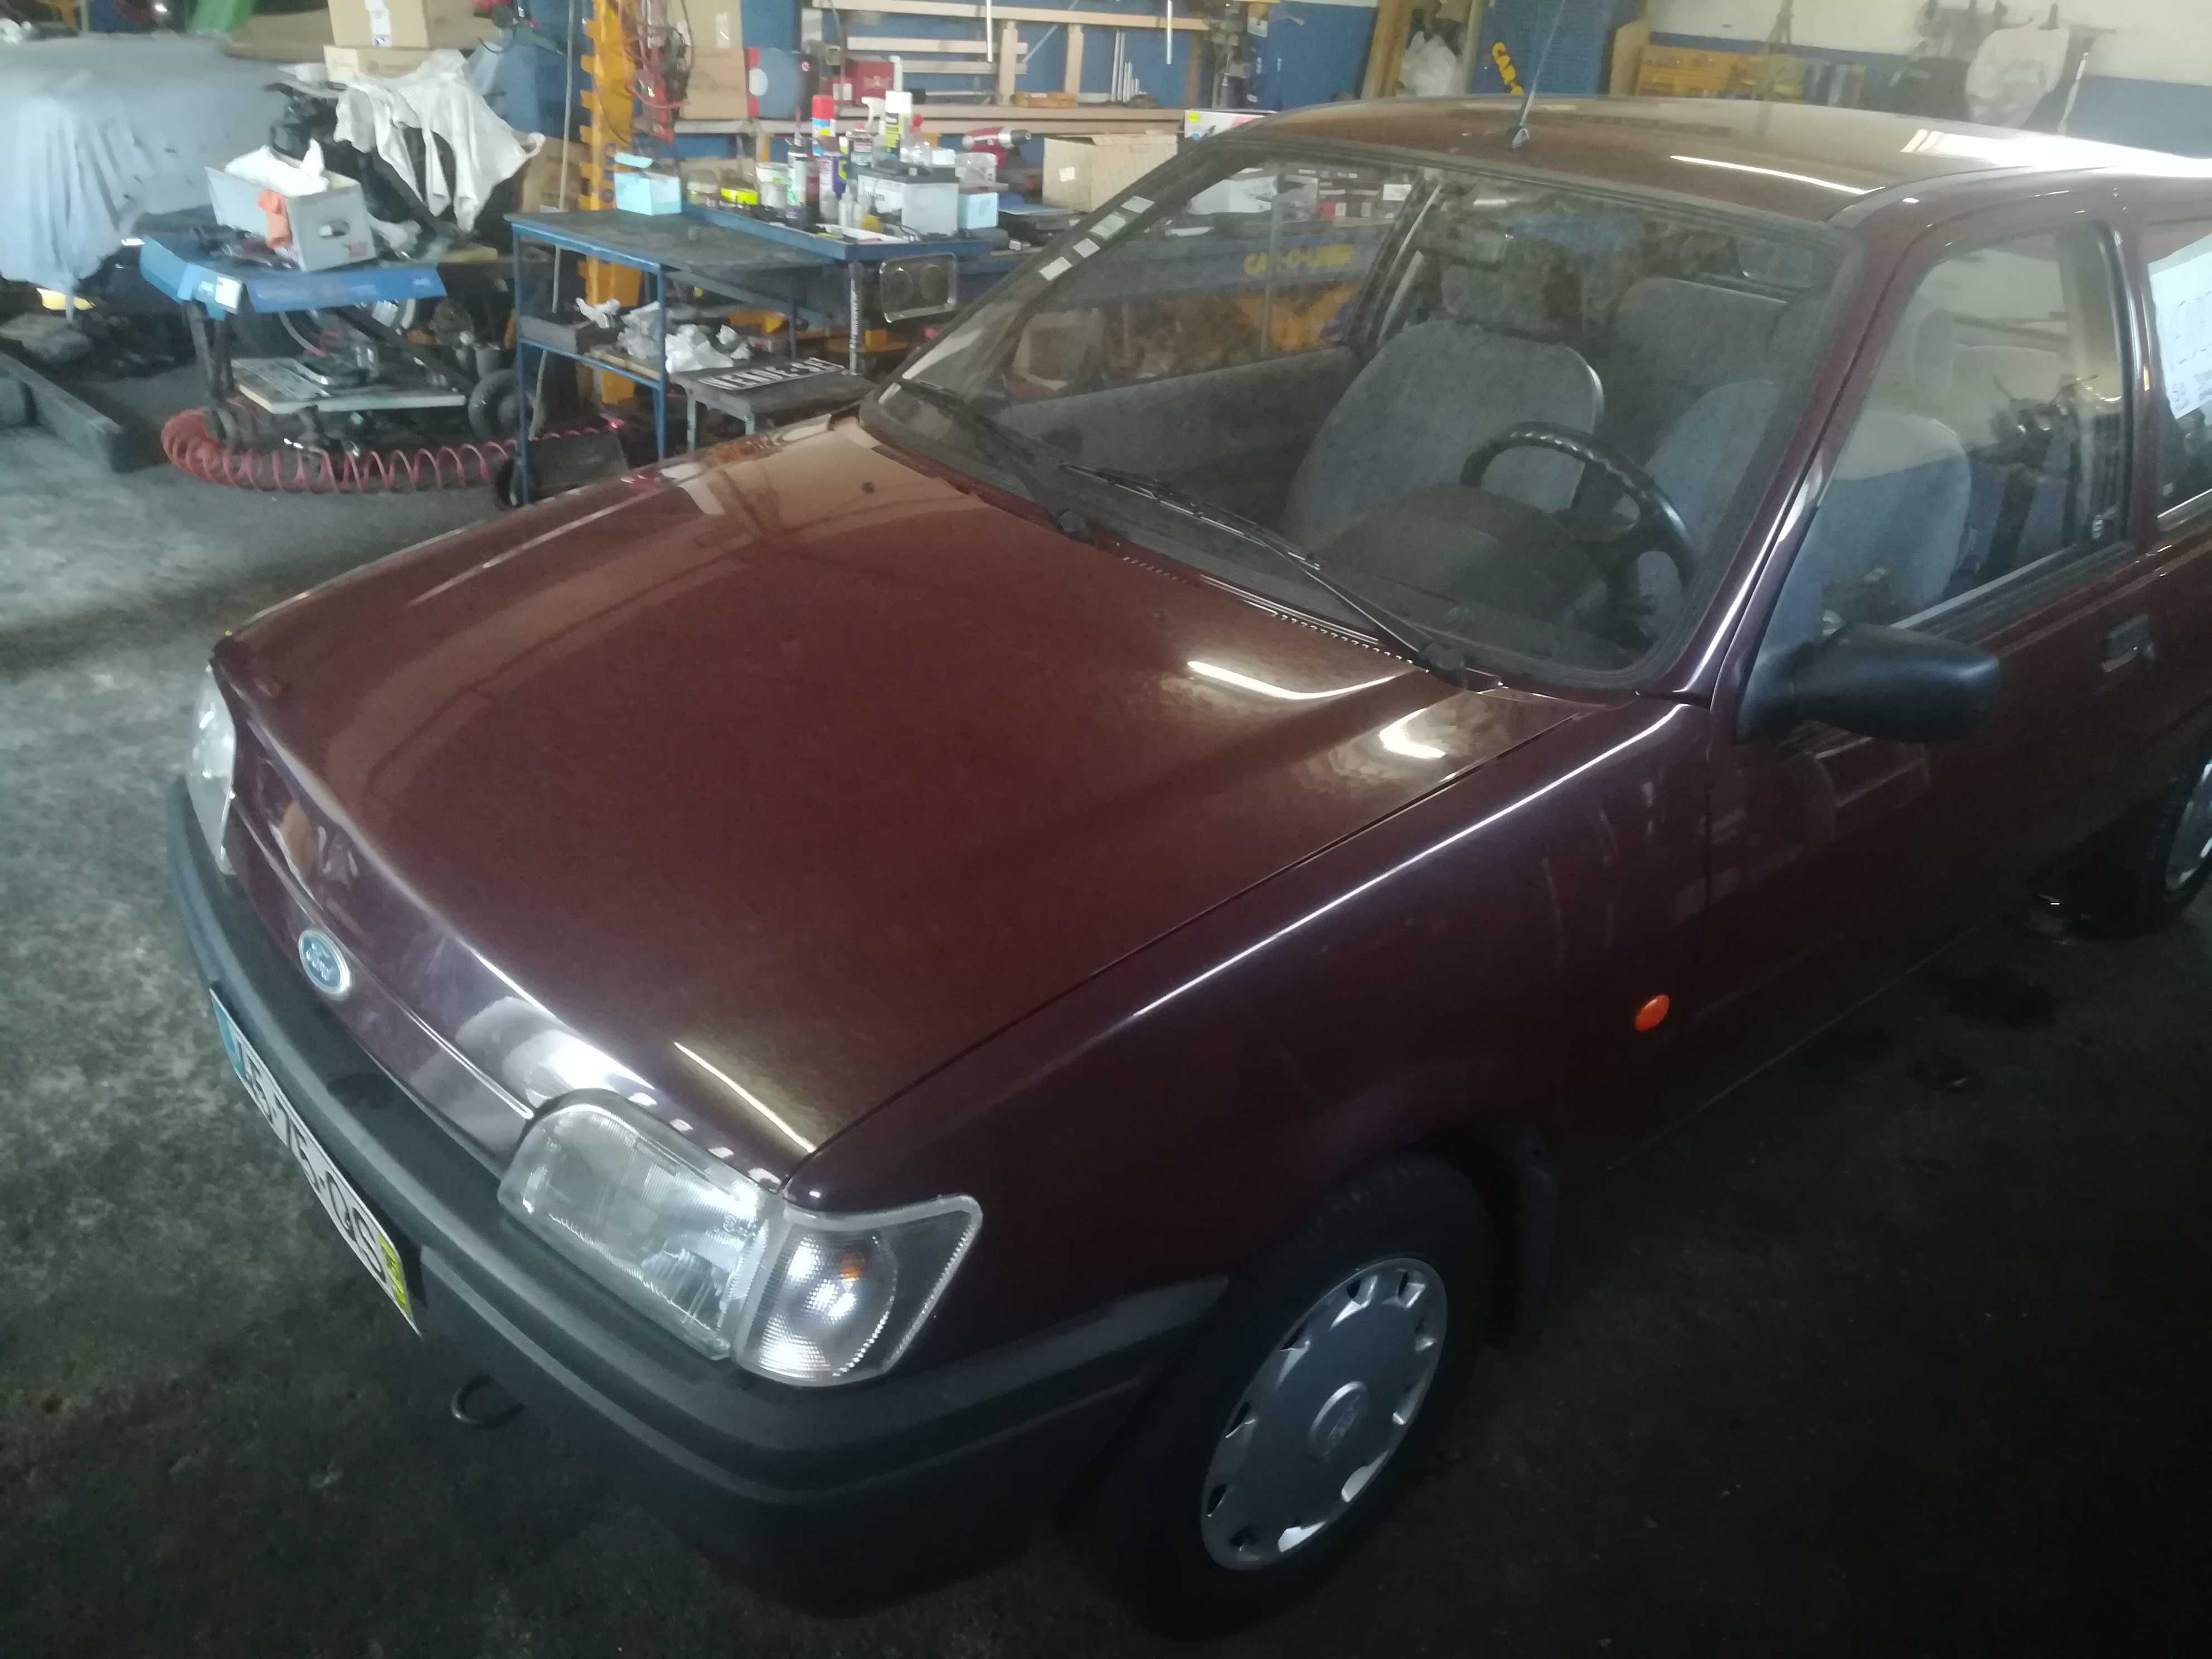 Ford Fiesta 1.1 ano 95 -Colecao